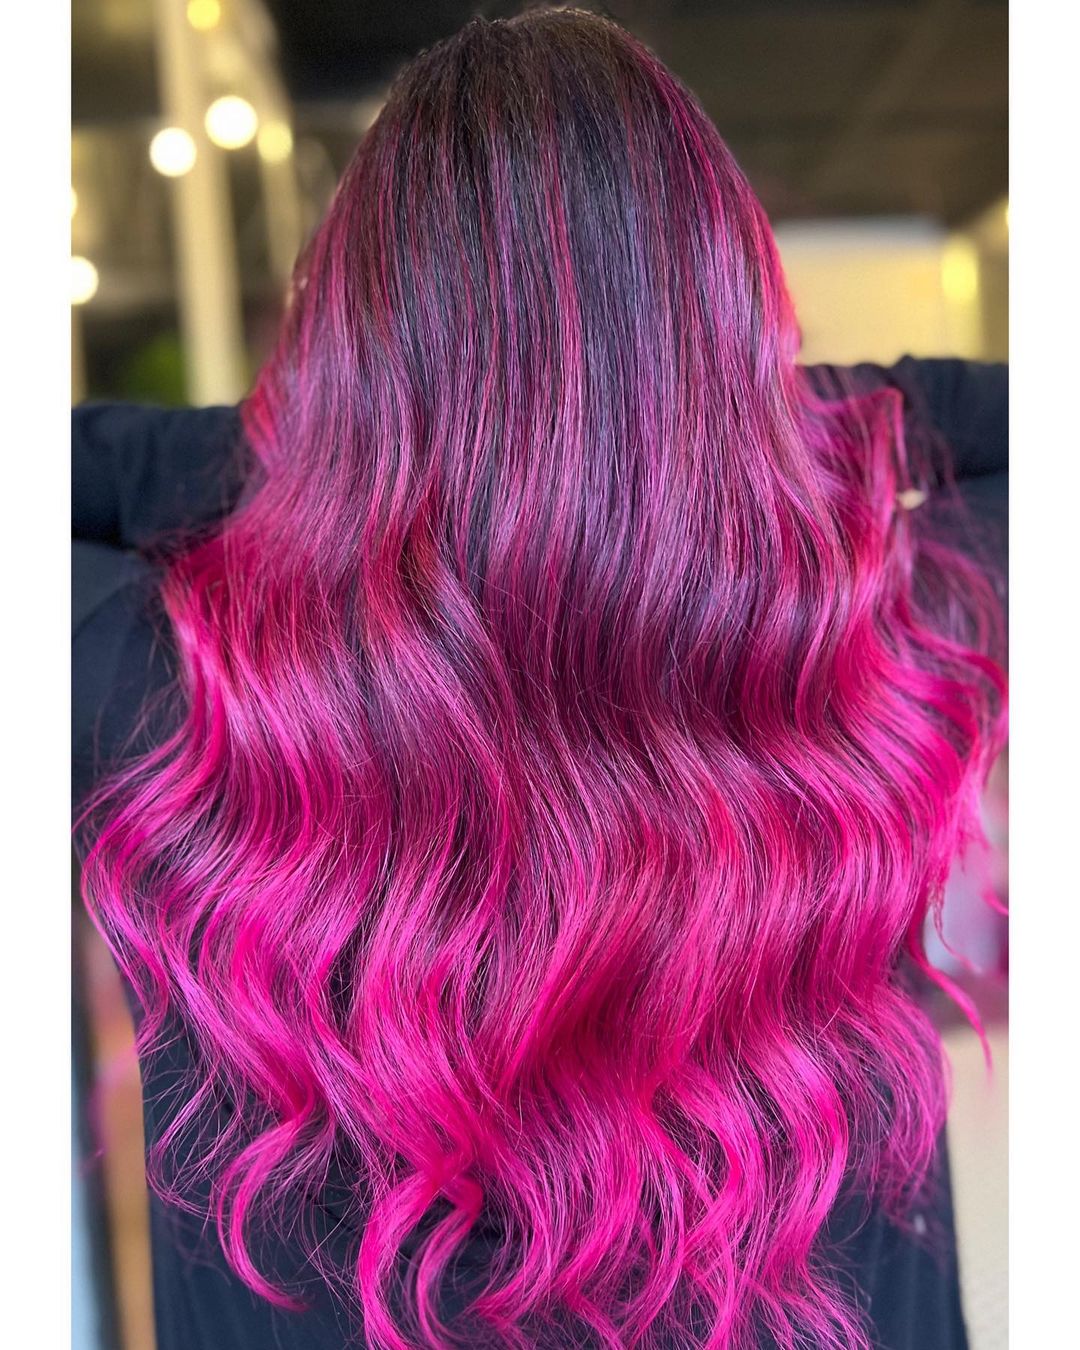 pink ombre hair color 132 Ombre pink hair blonde | Pastel pink ombre hair | Pink balayage Hair Pink Ombre Hair Color for Women